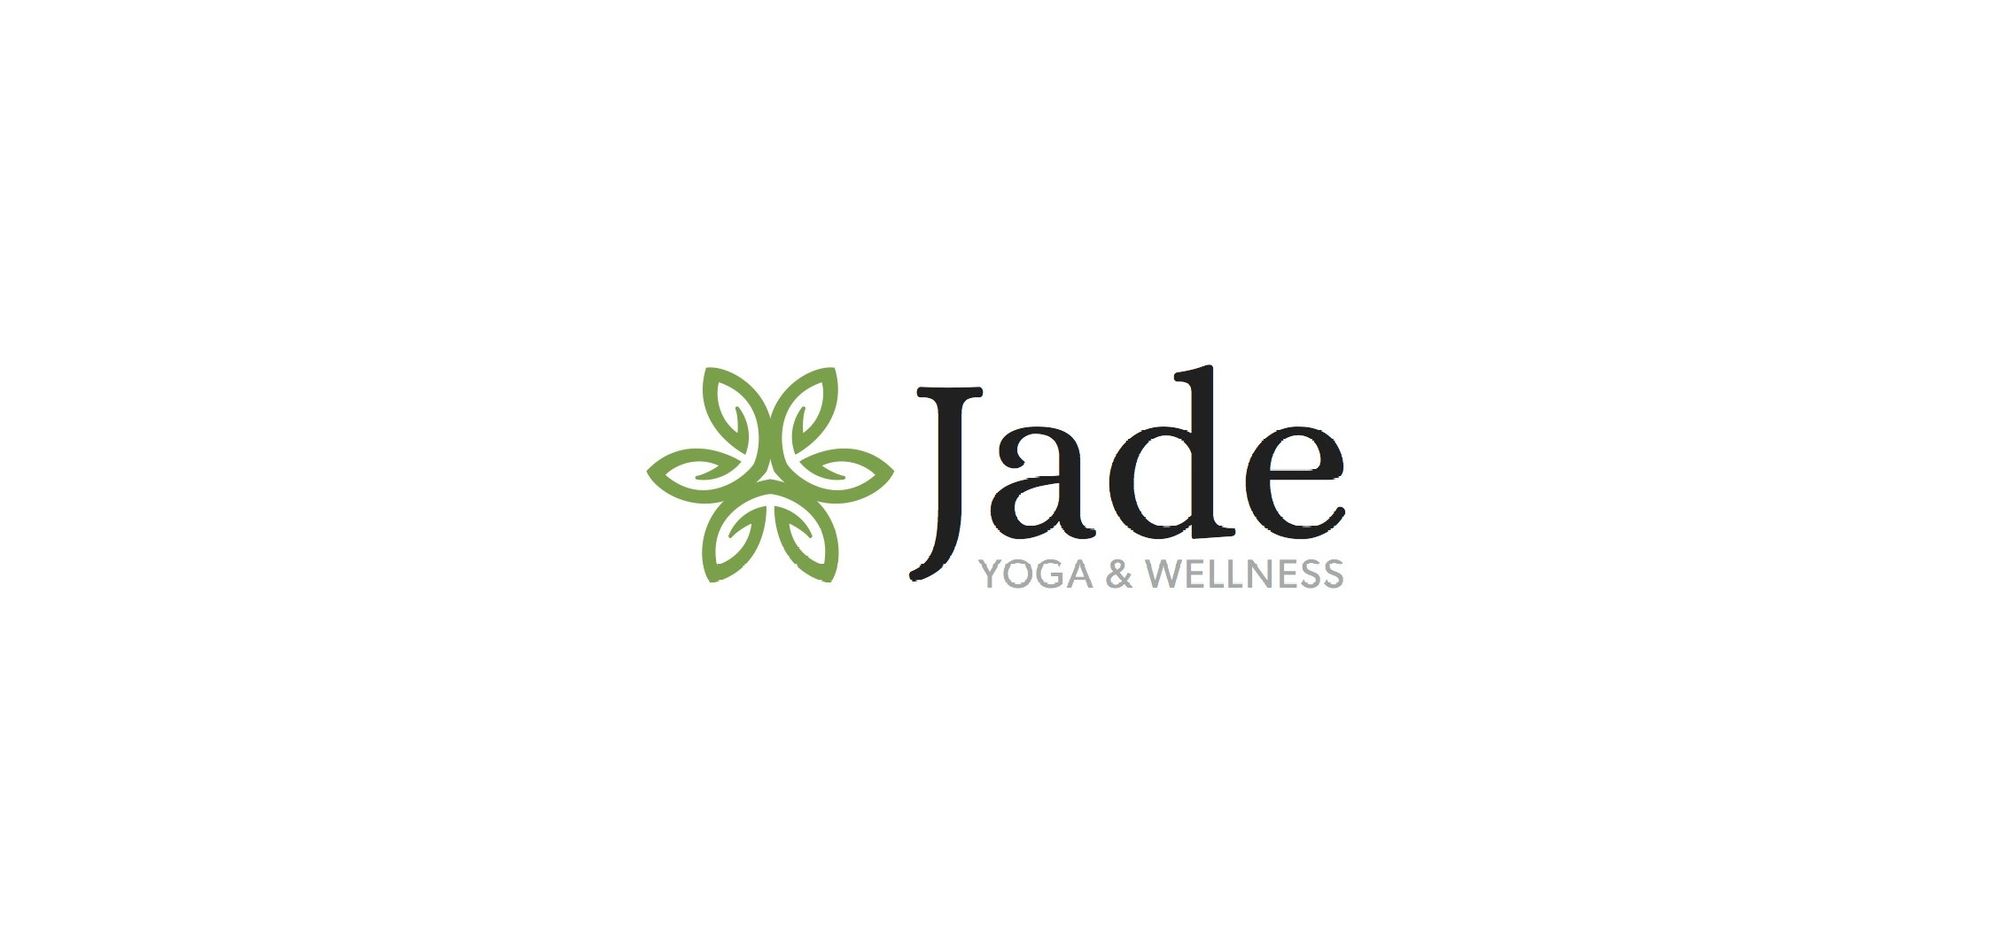 Making Yoga Easily Accessible for All - Jade Yoga and Wellness